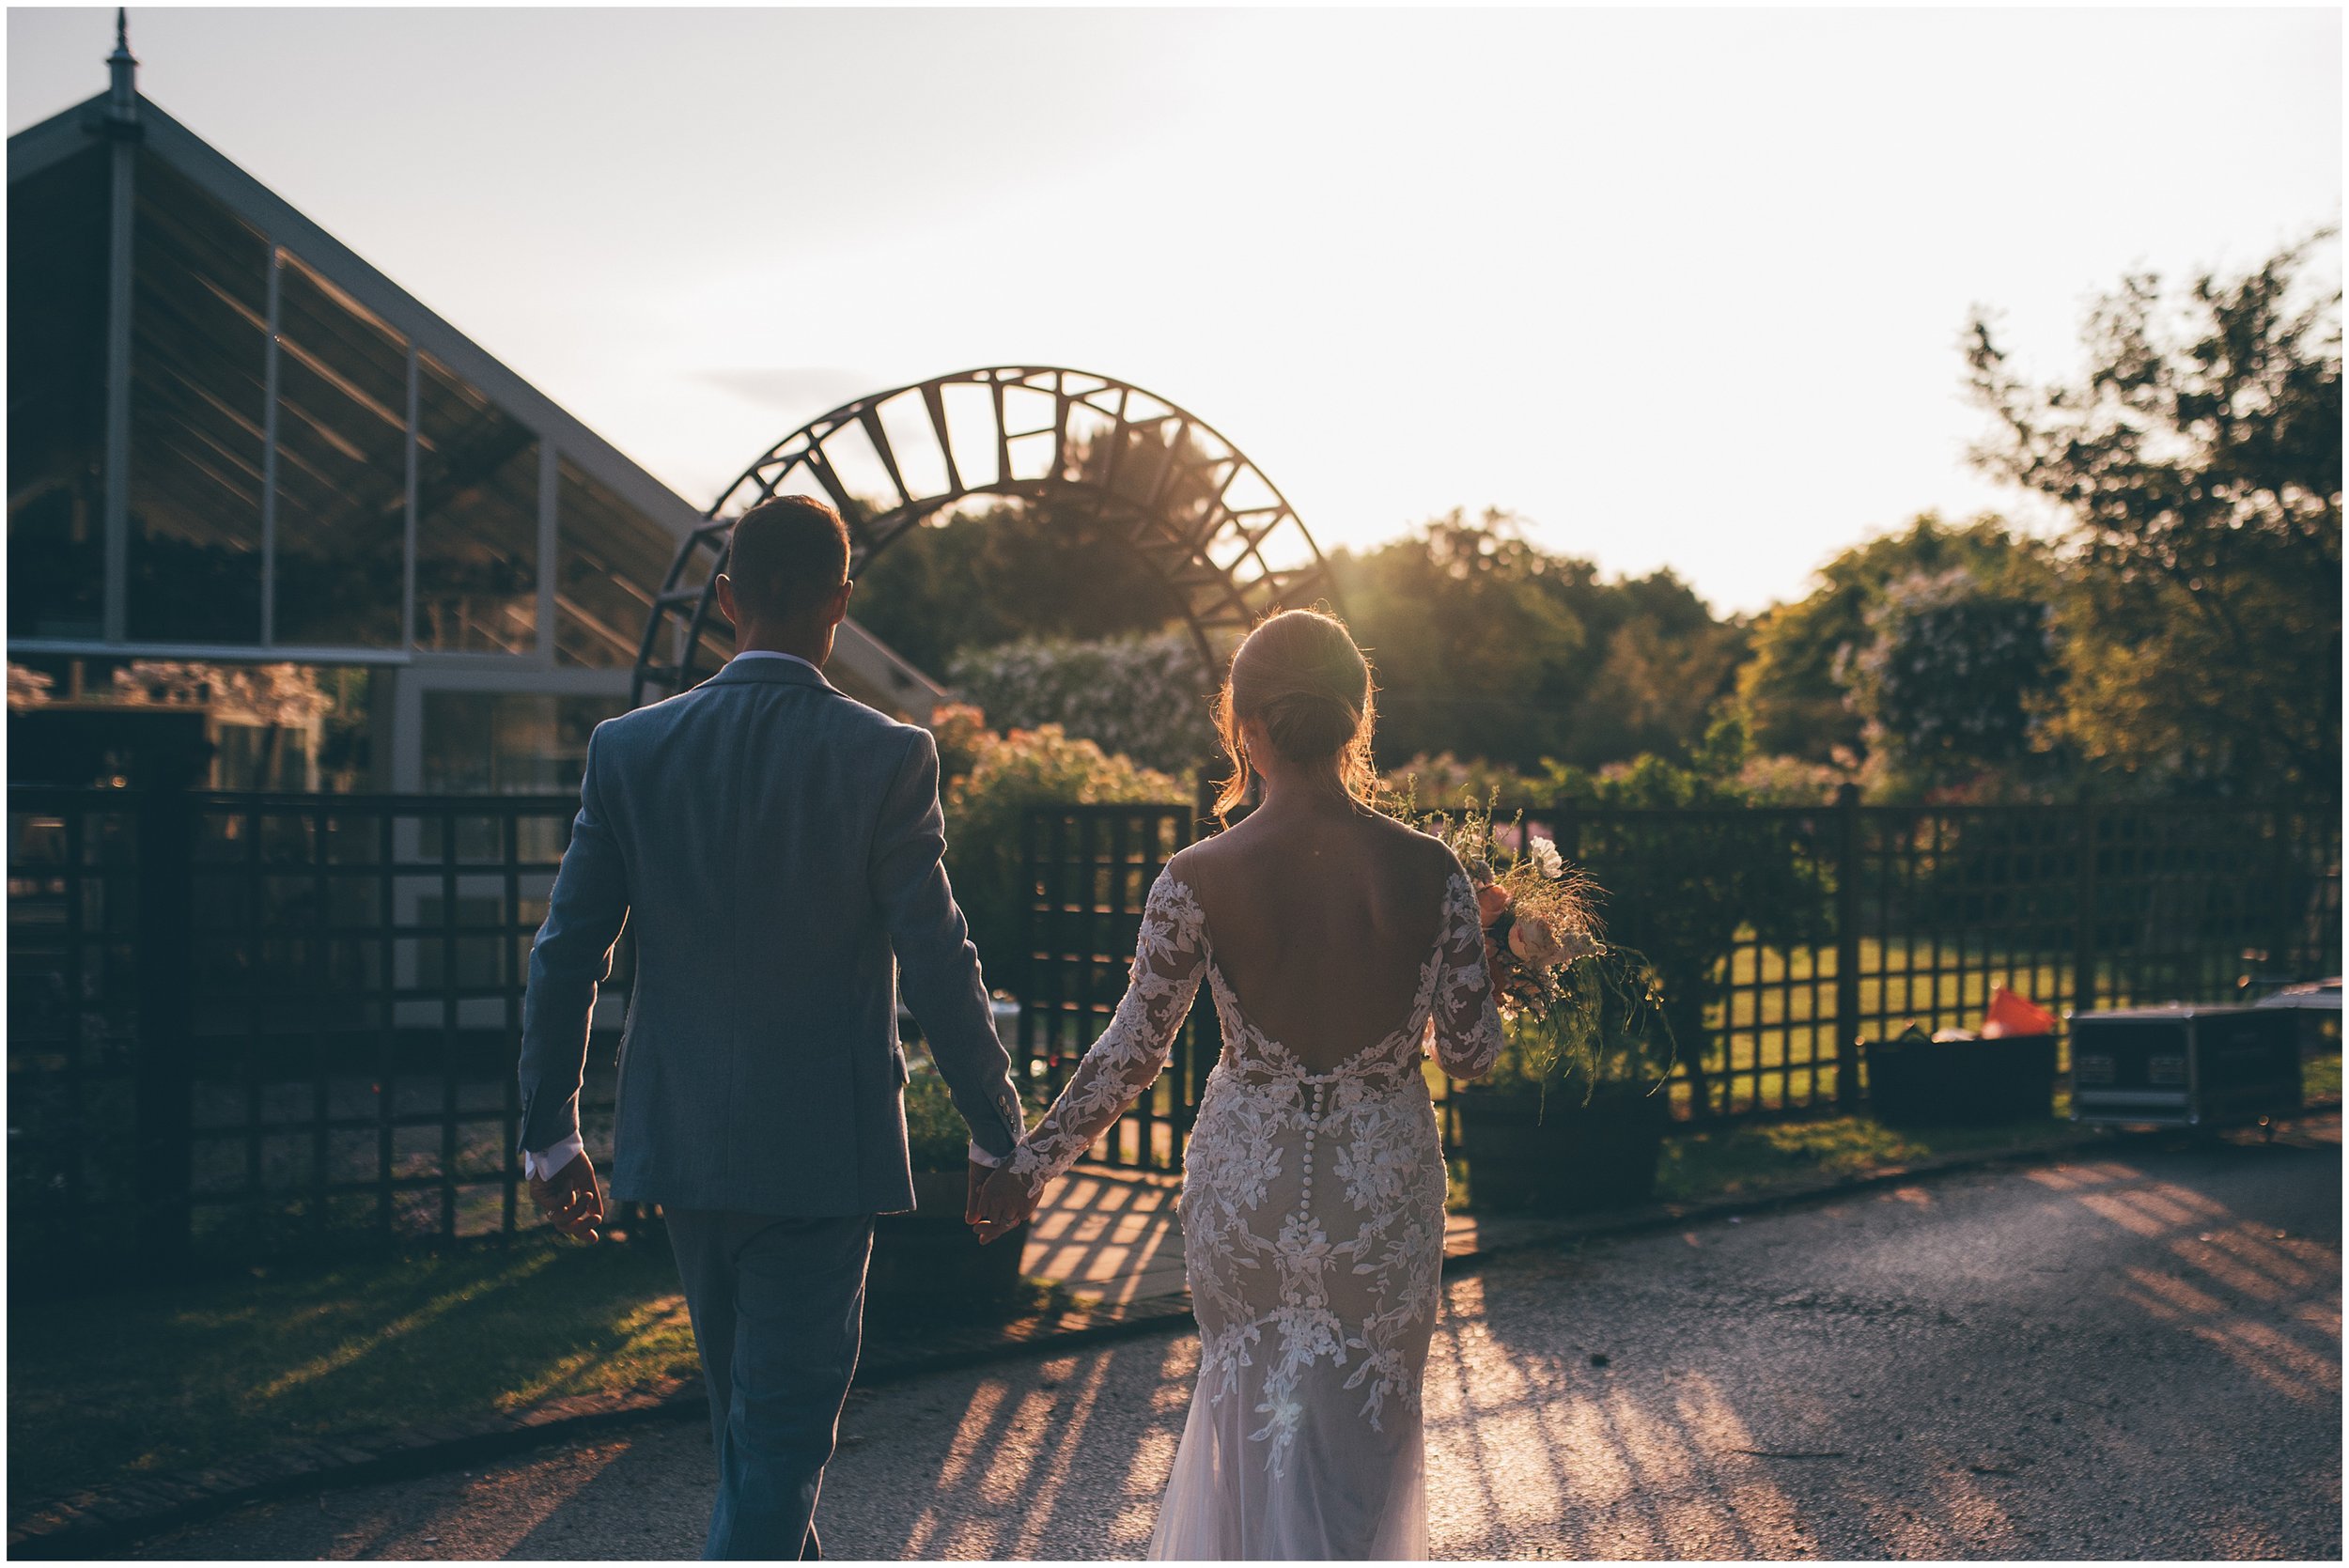 New husband and wife have portraits taken during golden hour at their wedding venue with the wedding photographer, Helen Jane Smiddy Photography.